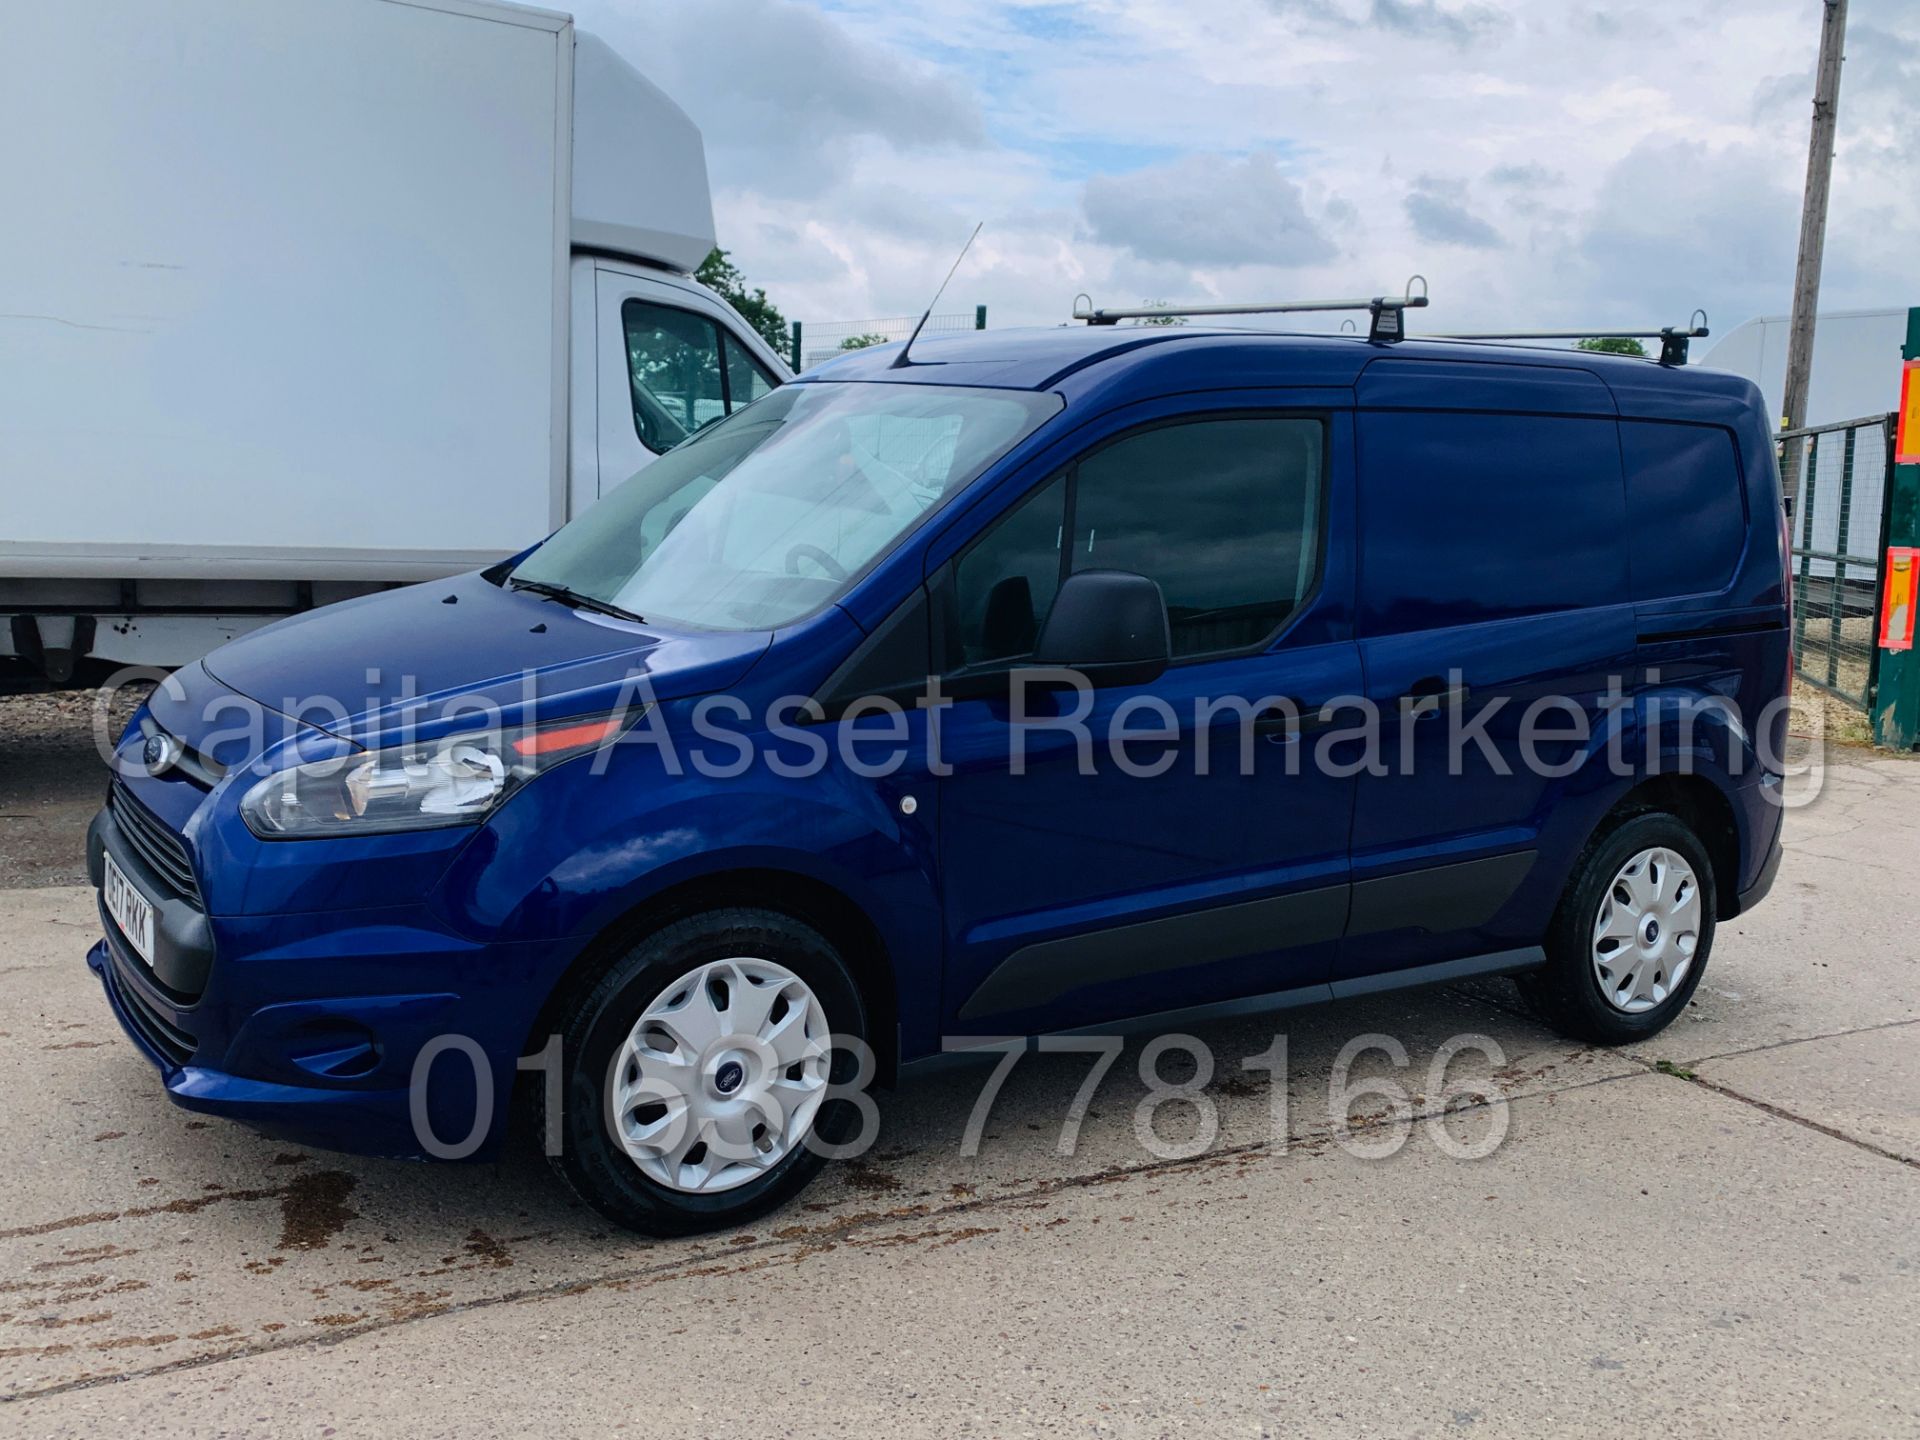 (On Sale) FORD TRANSIT CONNECT *TREND* SWB (2017 - EURO 6 VERSION) '1.5 TDCI - 100 BHP' (1 OWNER) - Image 3 of 39